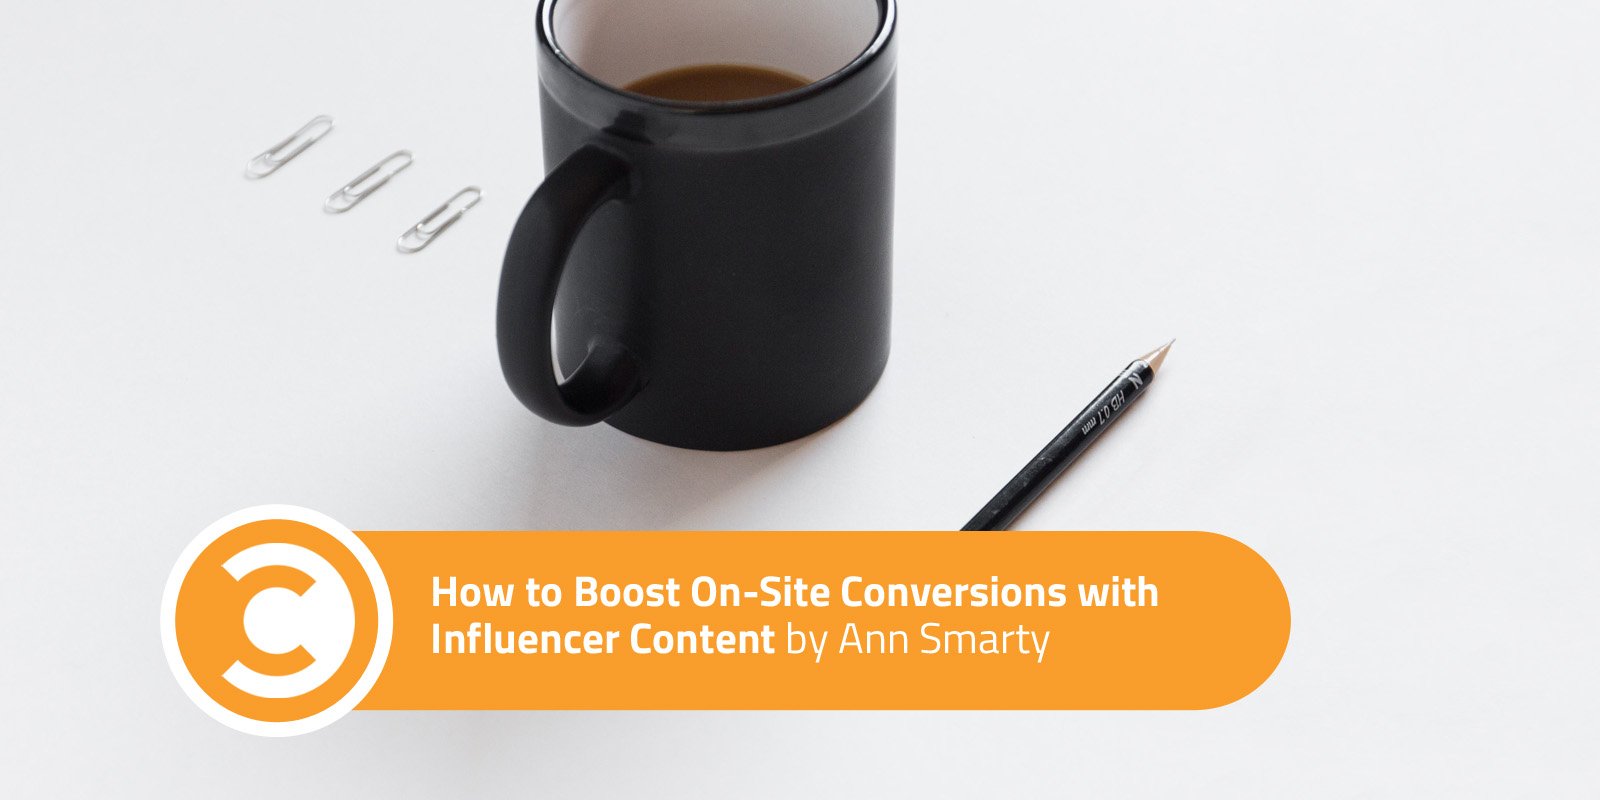 How to Boost On-Site Conversions with Influencer Content